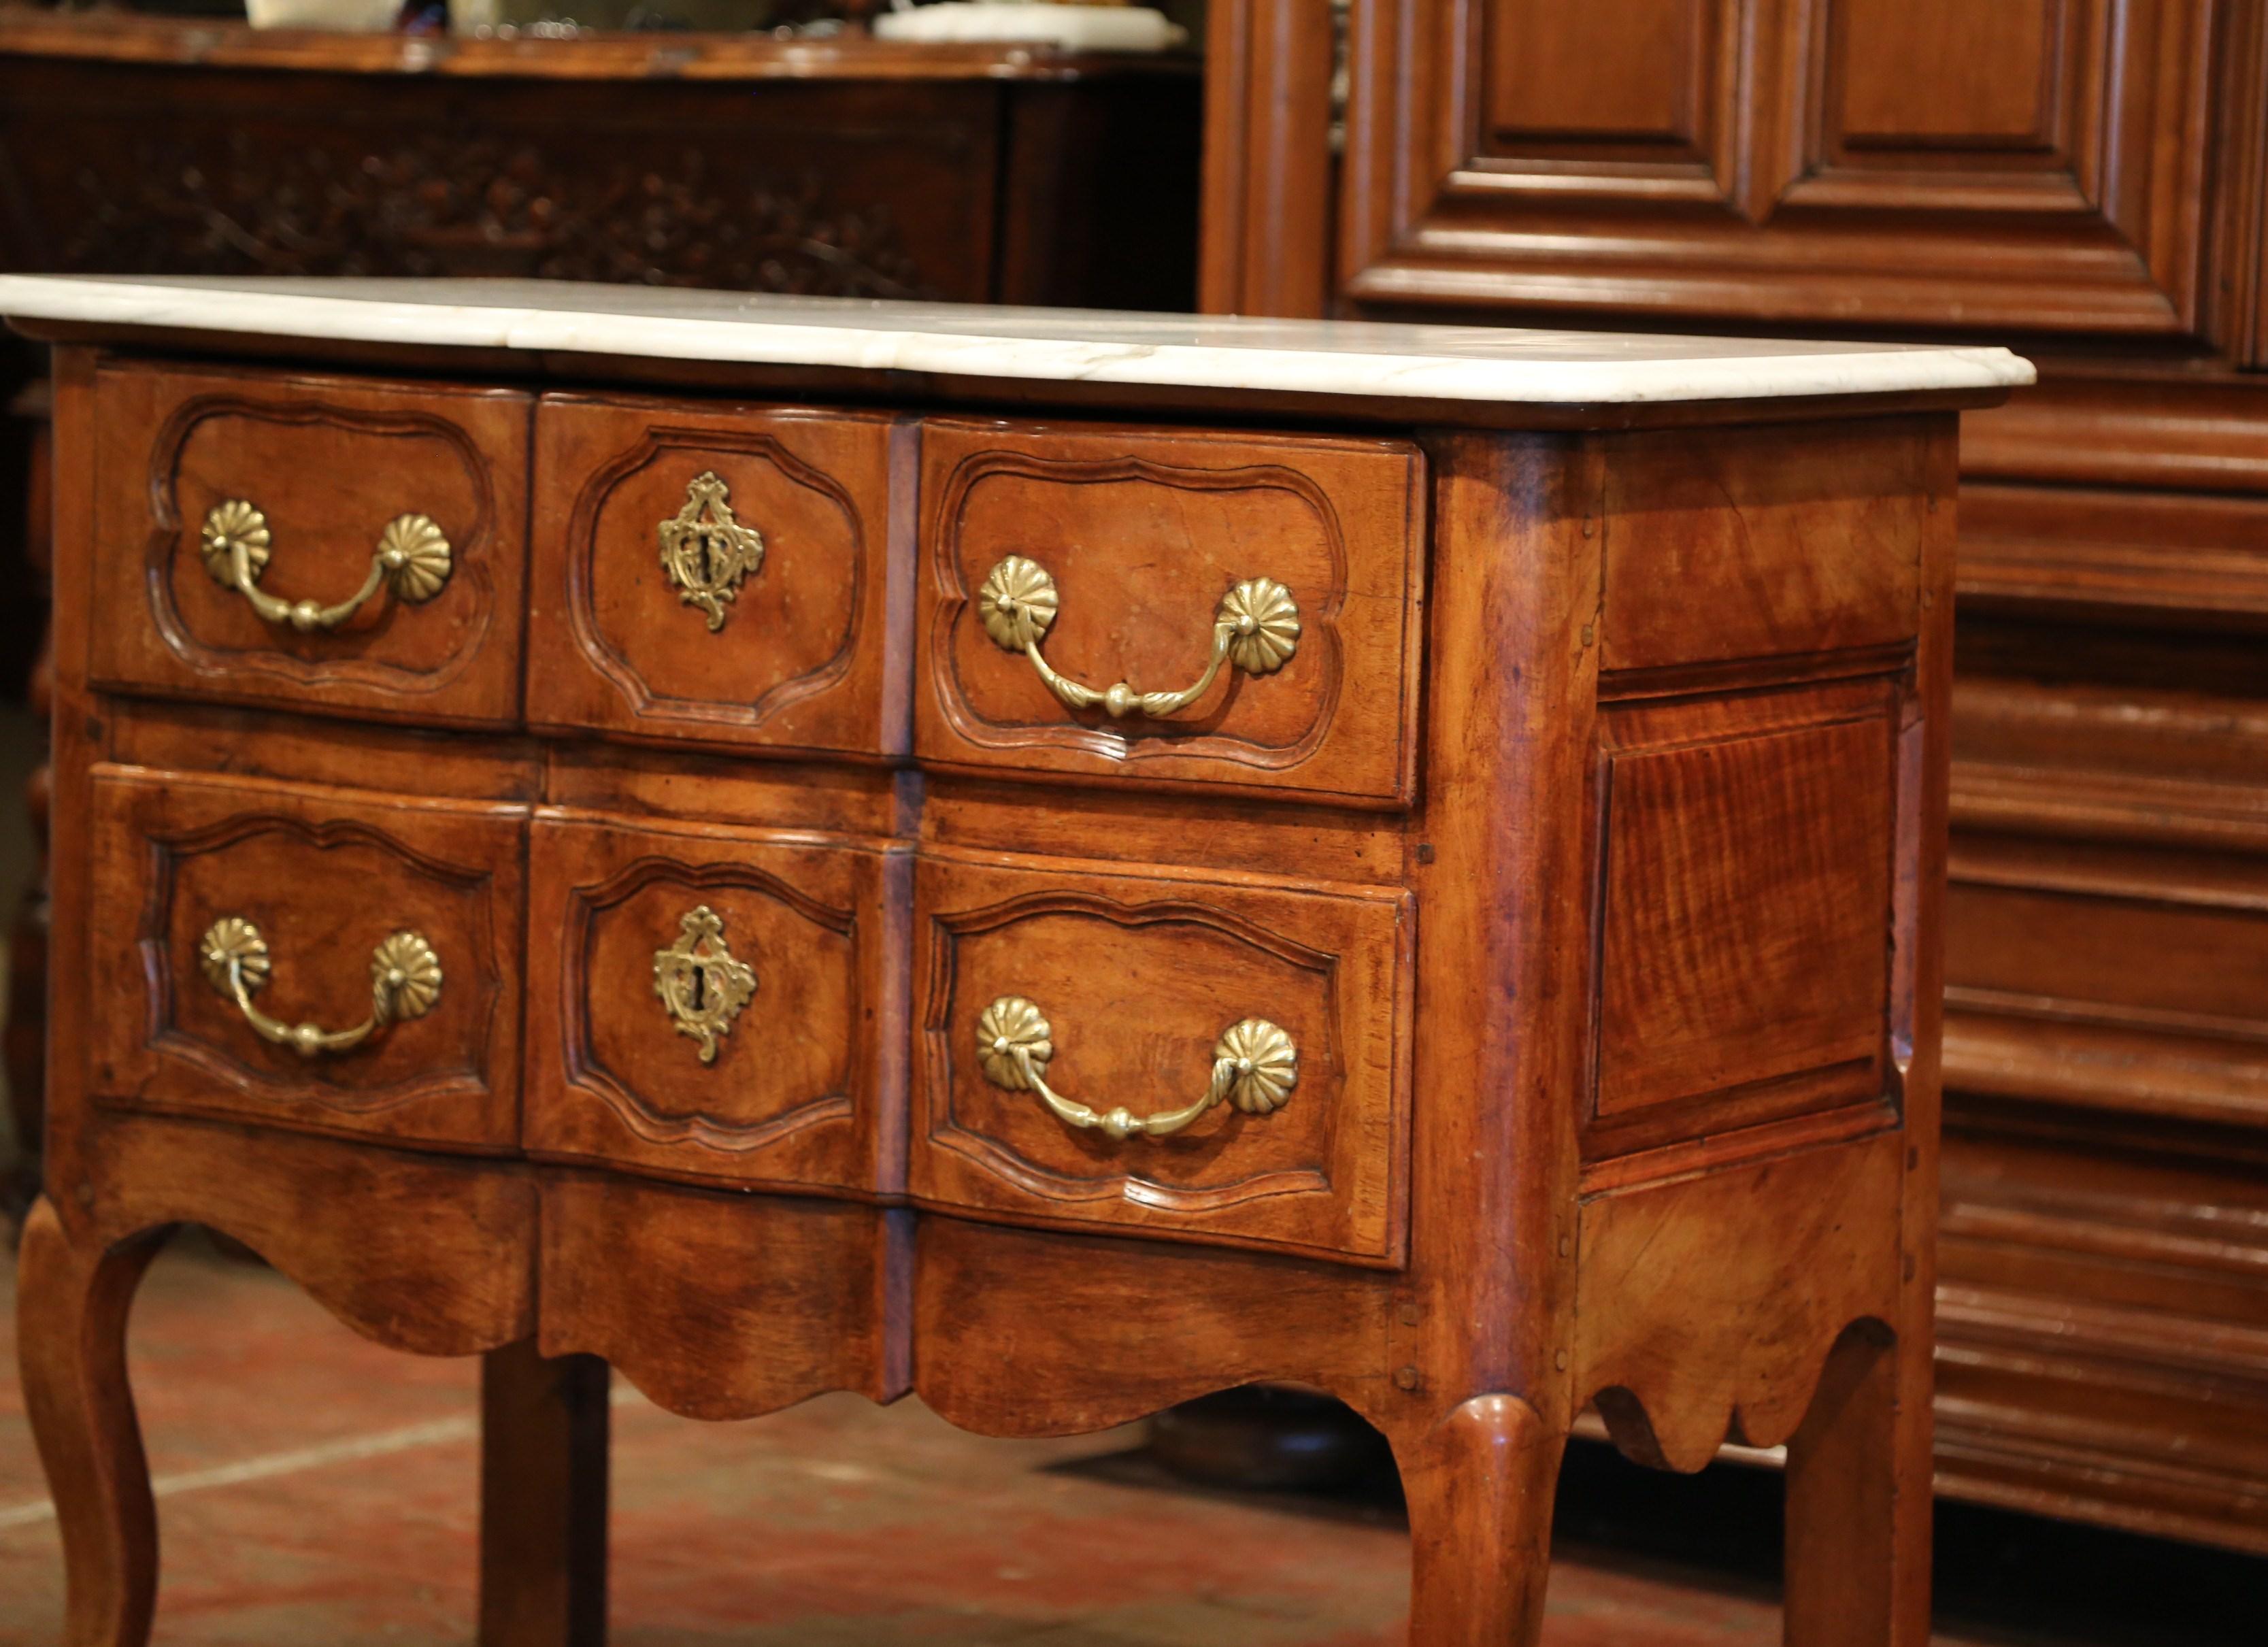 Louis XV Mid-19th Century French Carved Walnut Commode Chest of Drawers with Marble Top